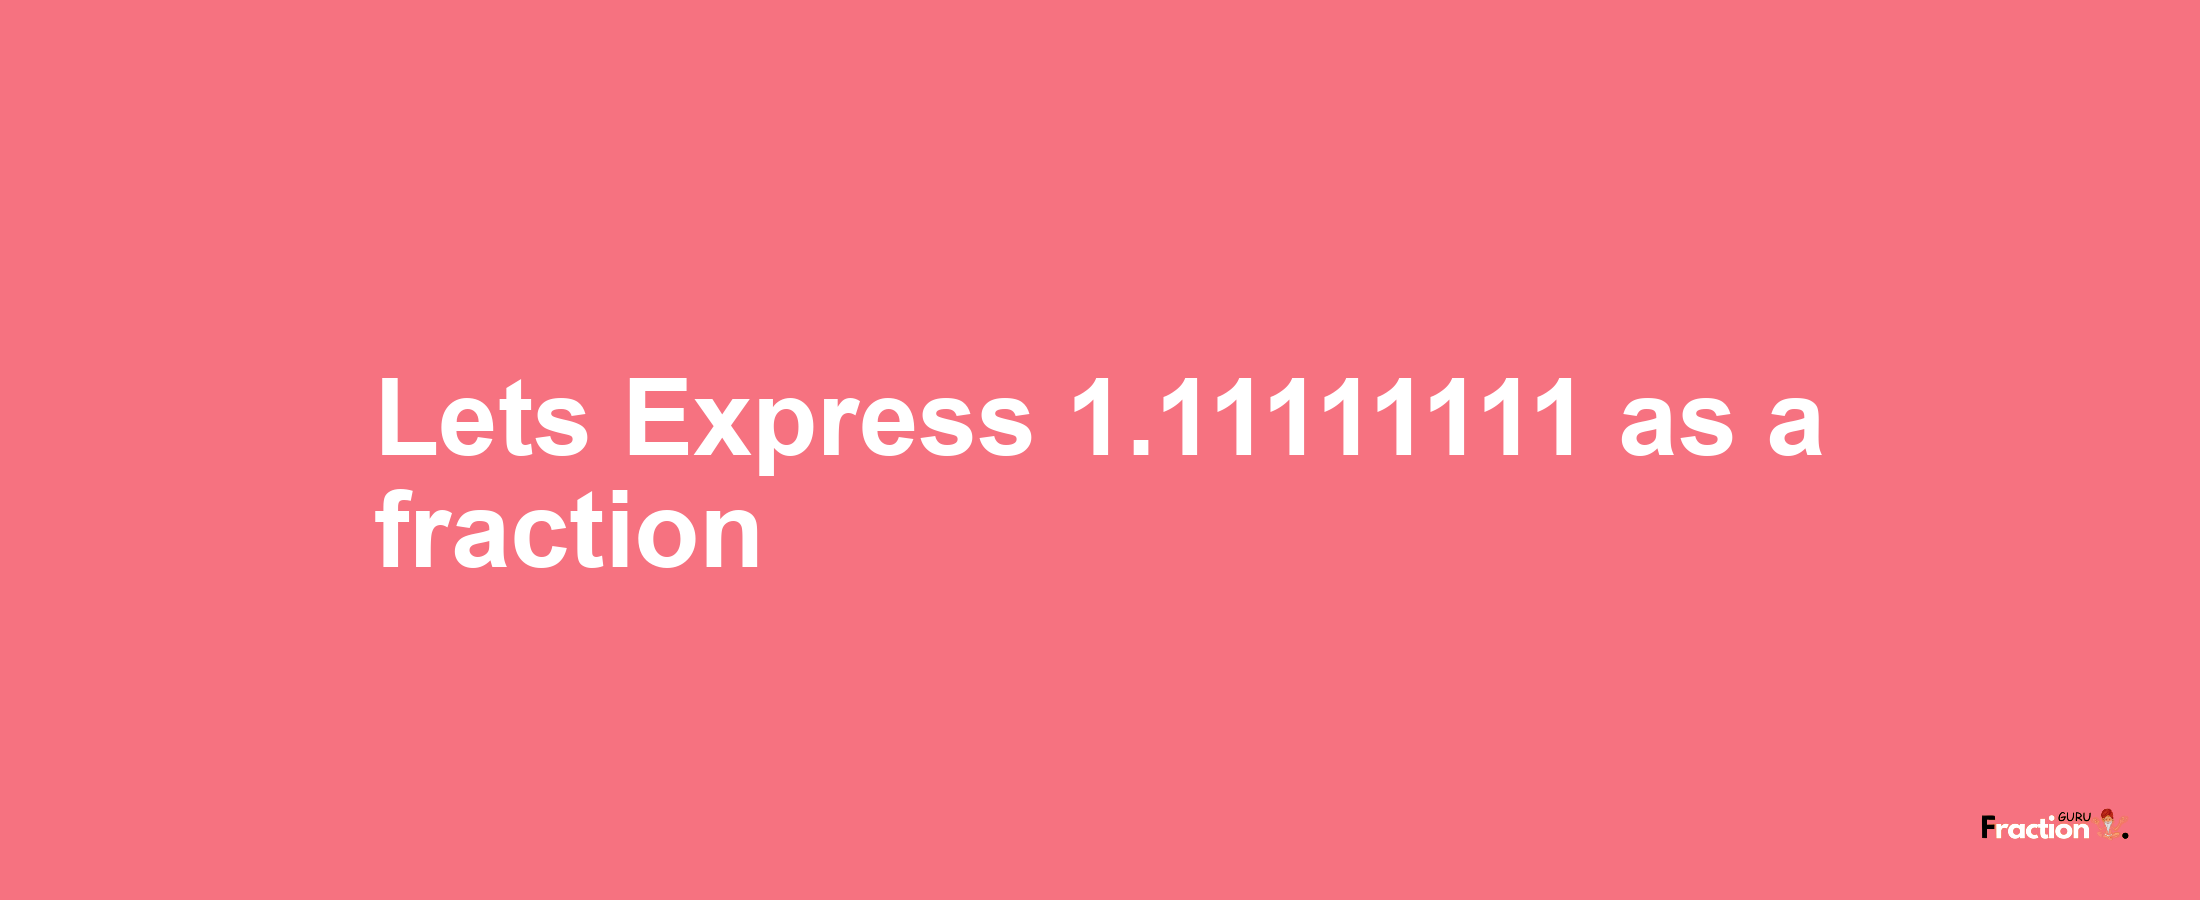 Lets Express 1.11111111 as afraction